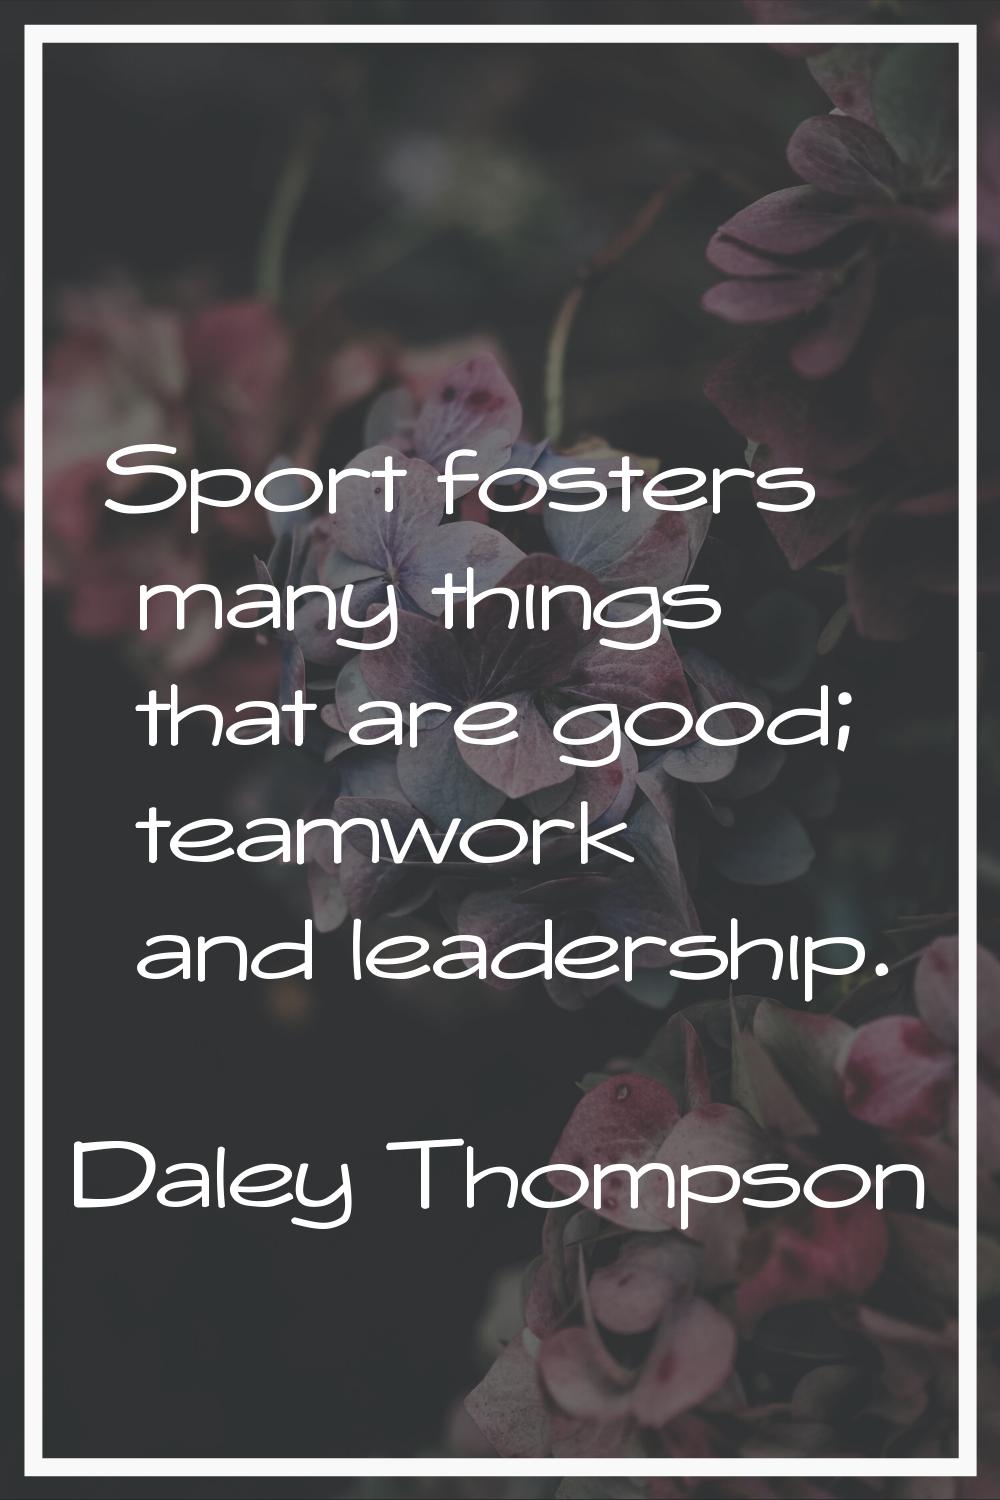 Sport fosters many things that are good; teamwork and leadership.